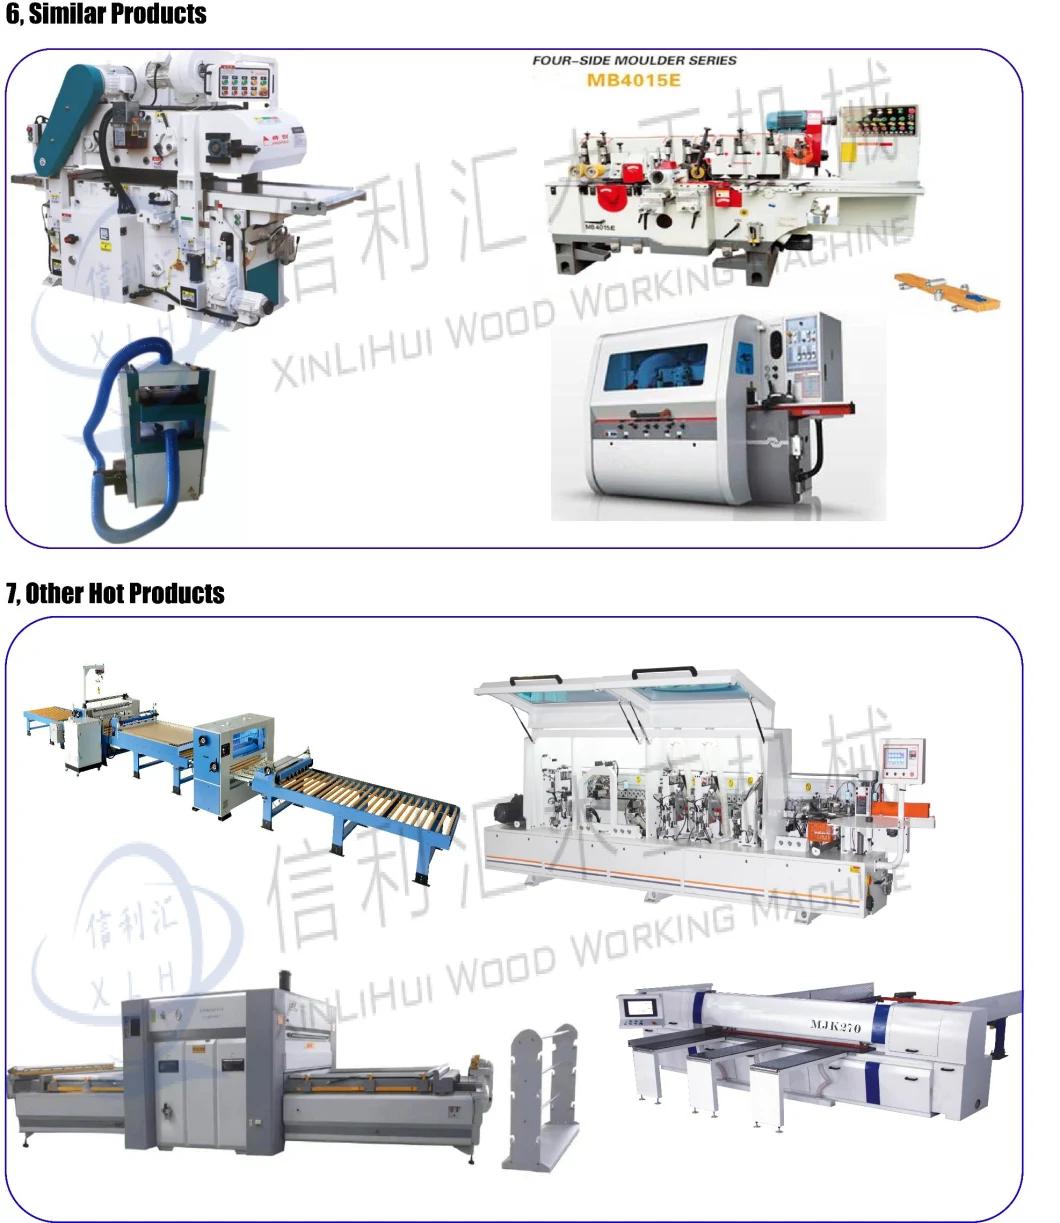 Automatic High Speed 4 Side Planer Moulder for Wood Processing Used for Finger Jointer Board